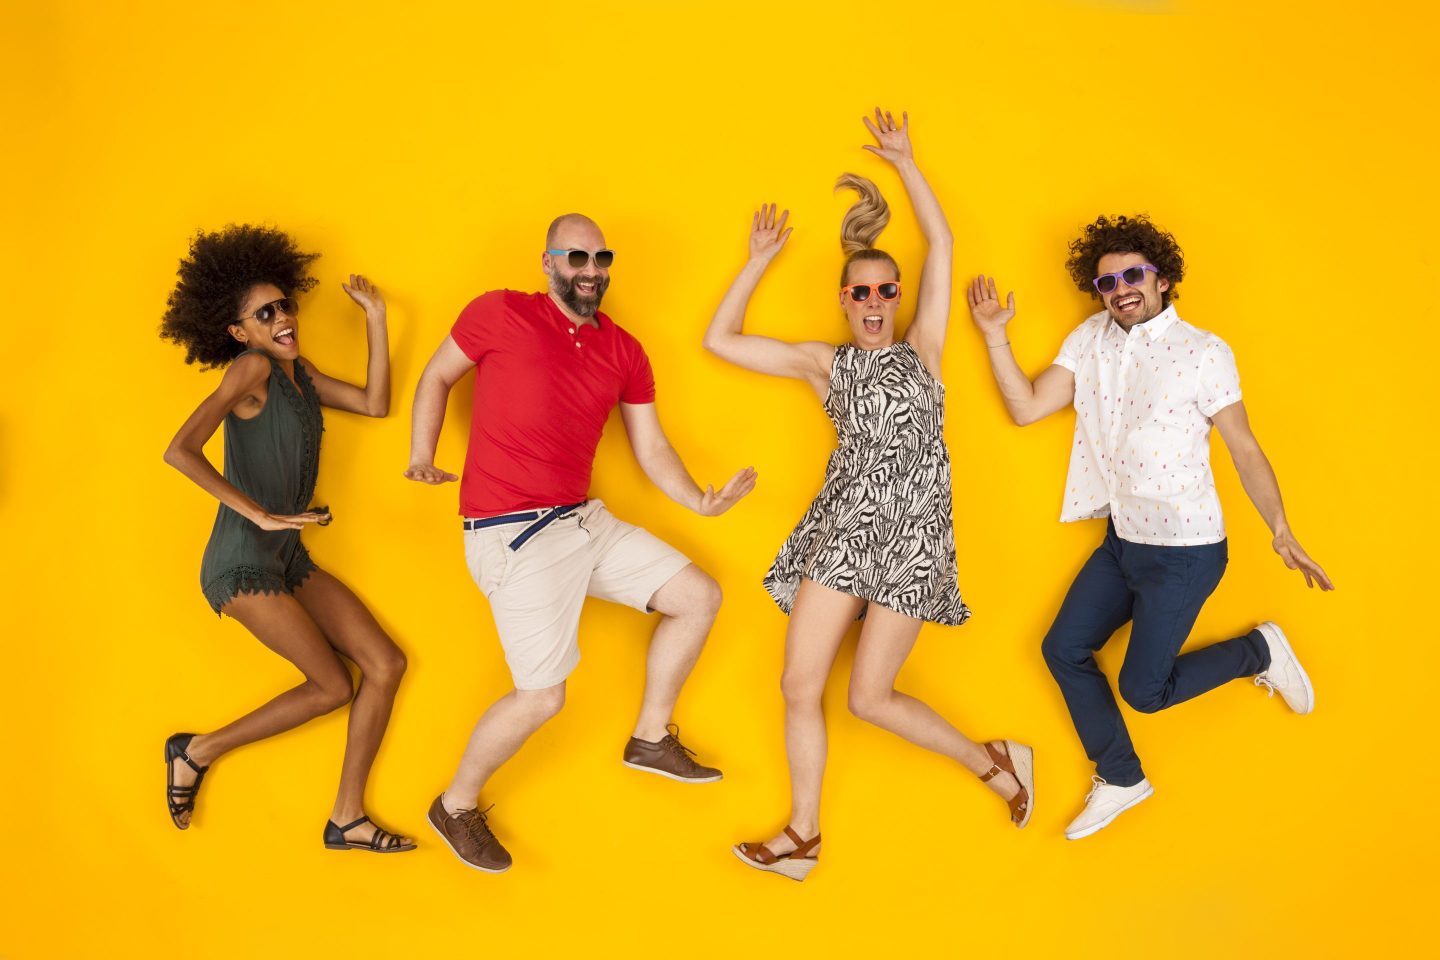 Group of millennials posing in front of a yellow backdrop